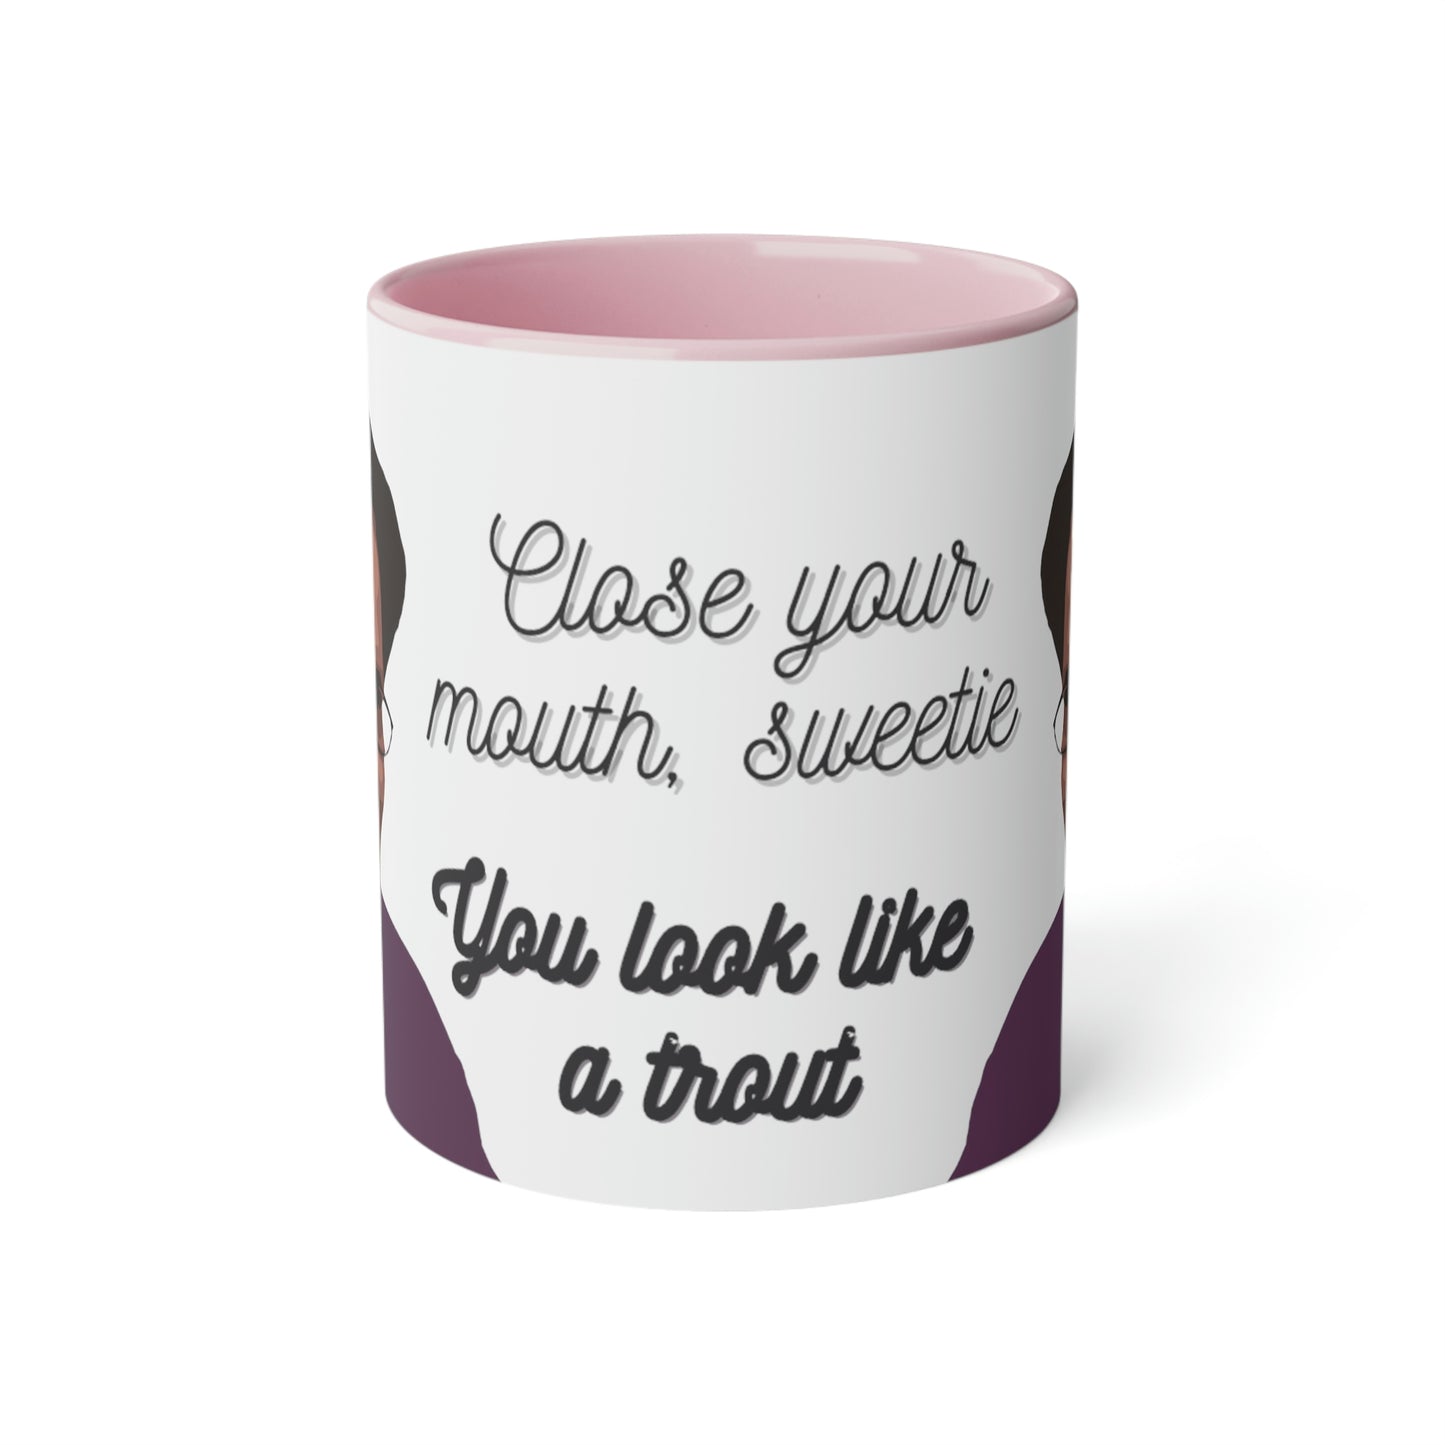 Meme Mug Dunder Mifflin workplace comedy - Close your mouth, sweetie  You look like a trout